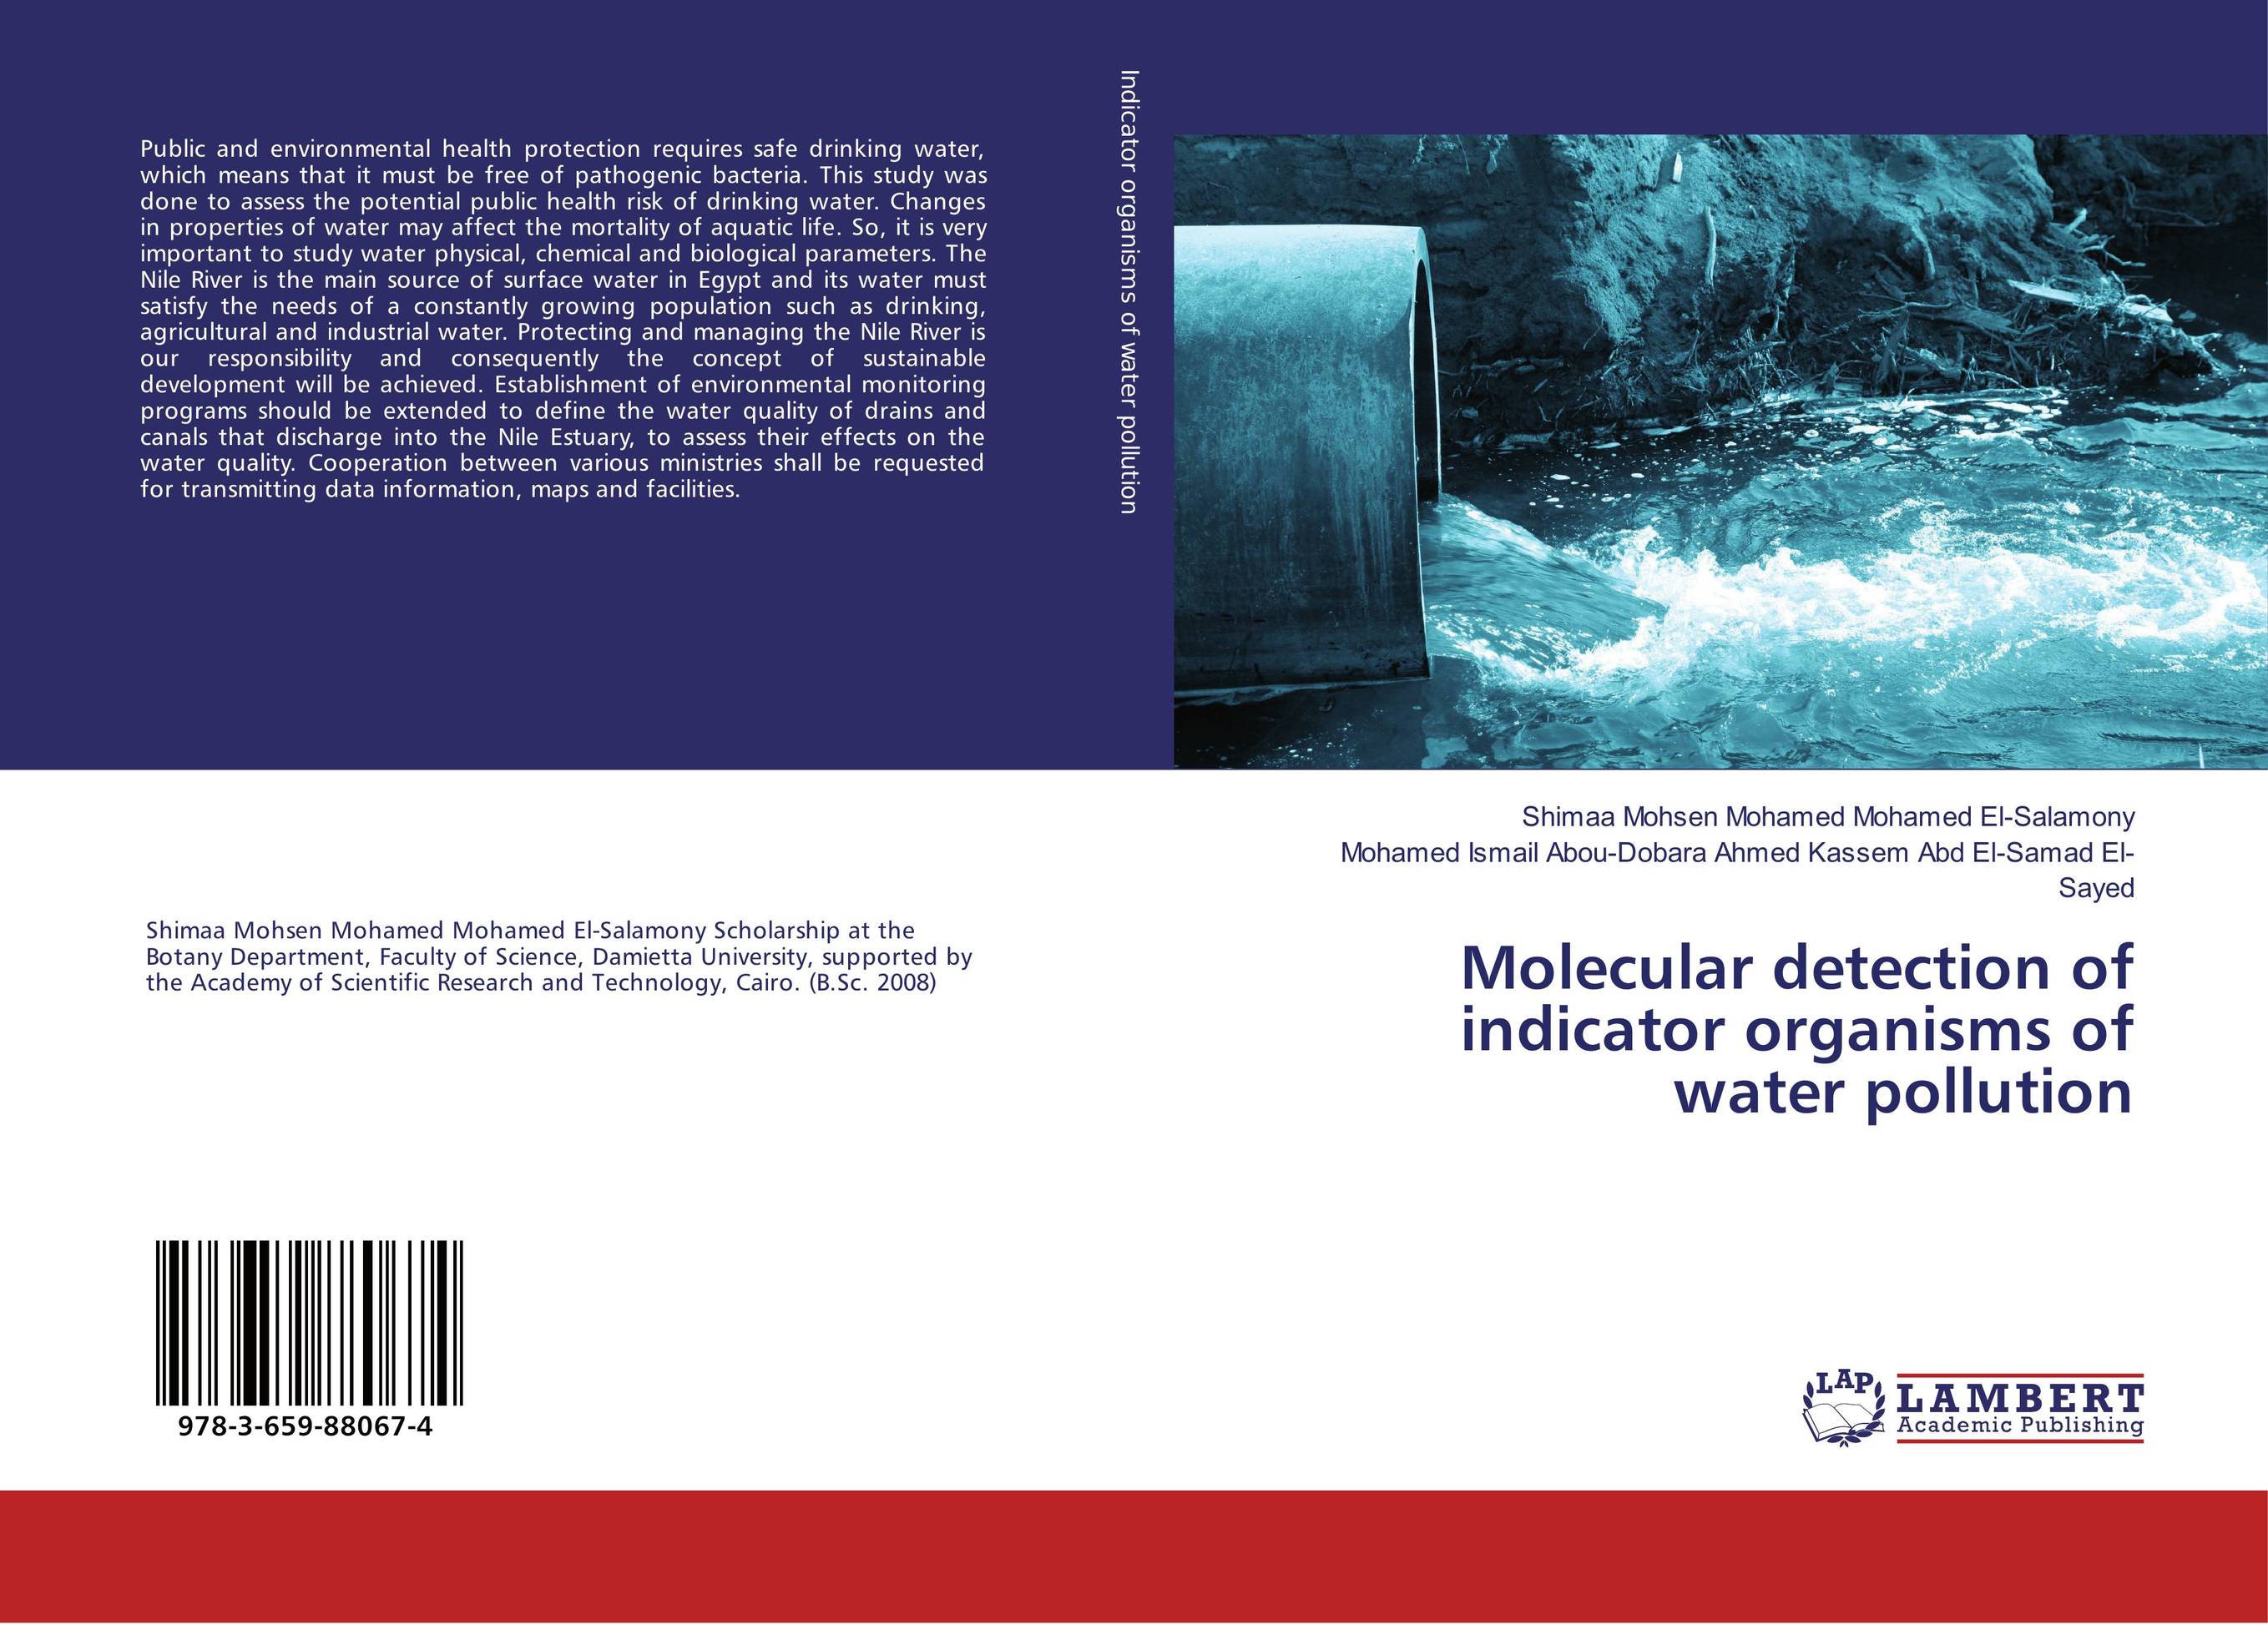 Molecular detection of indicator organisms of water pollution